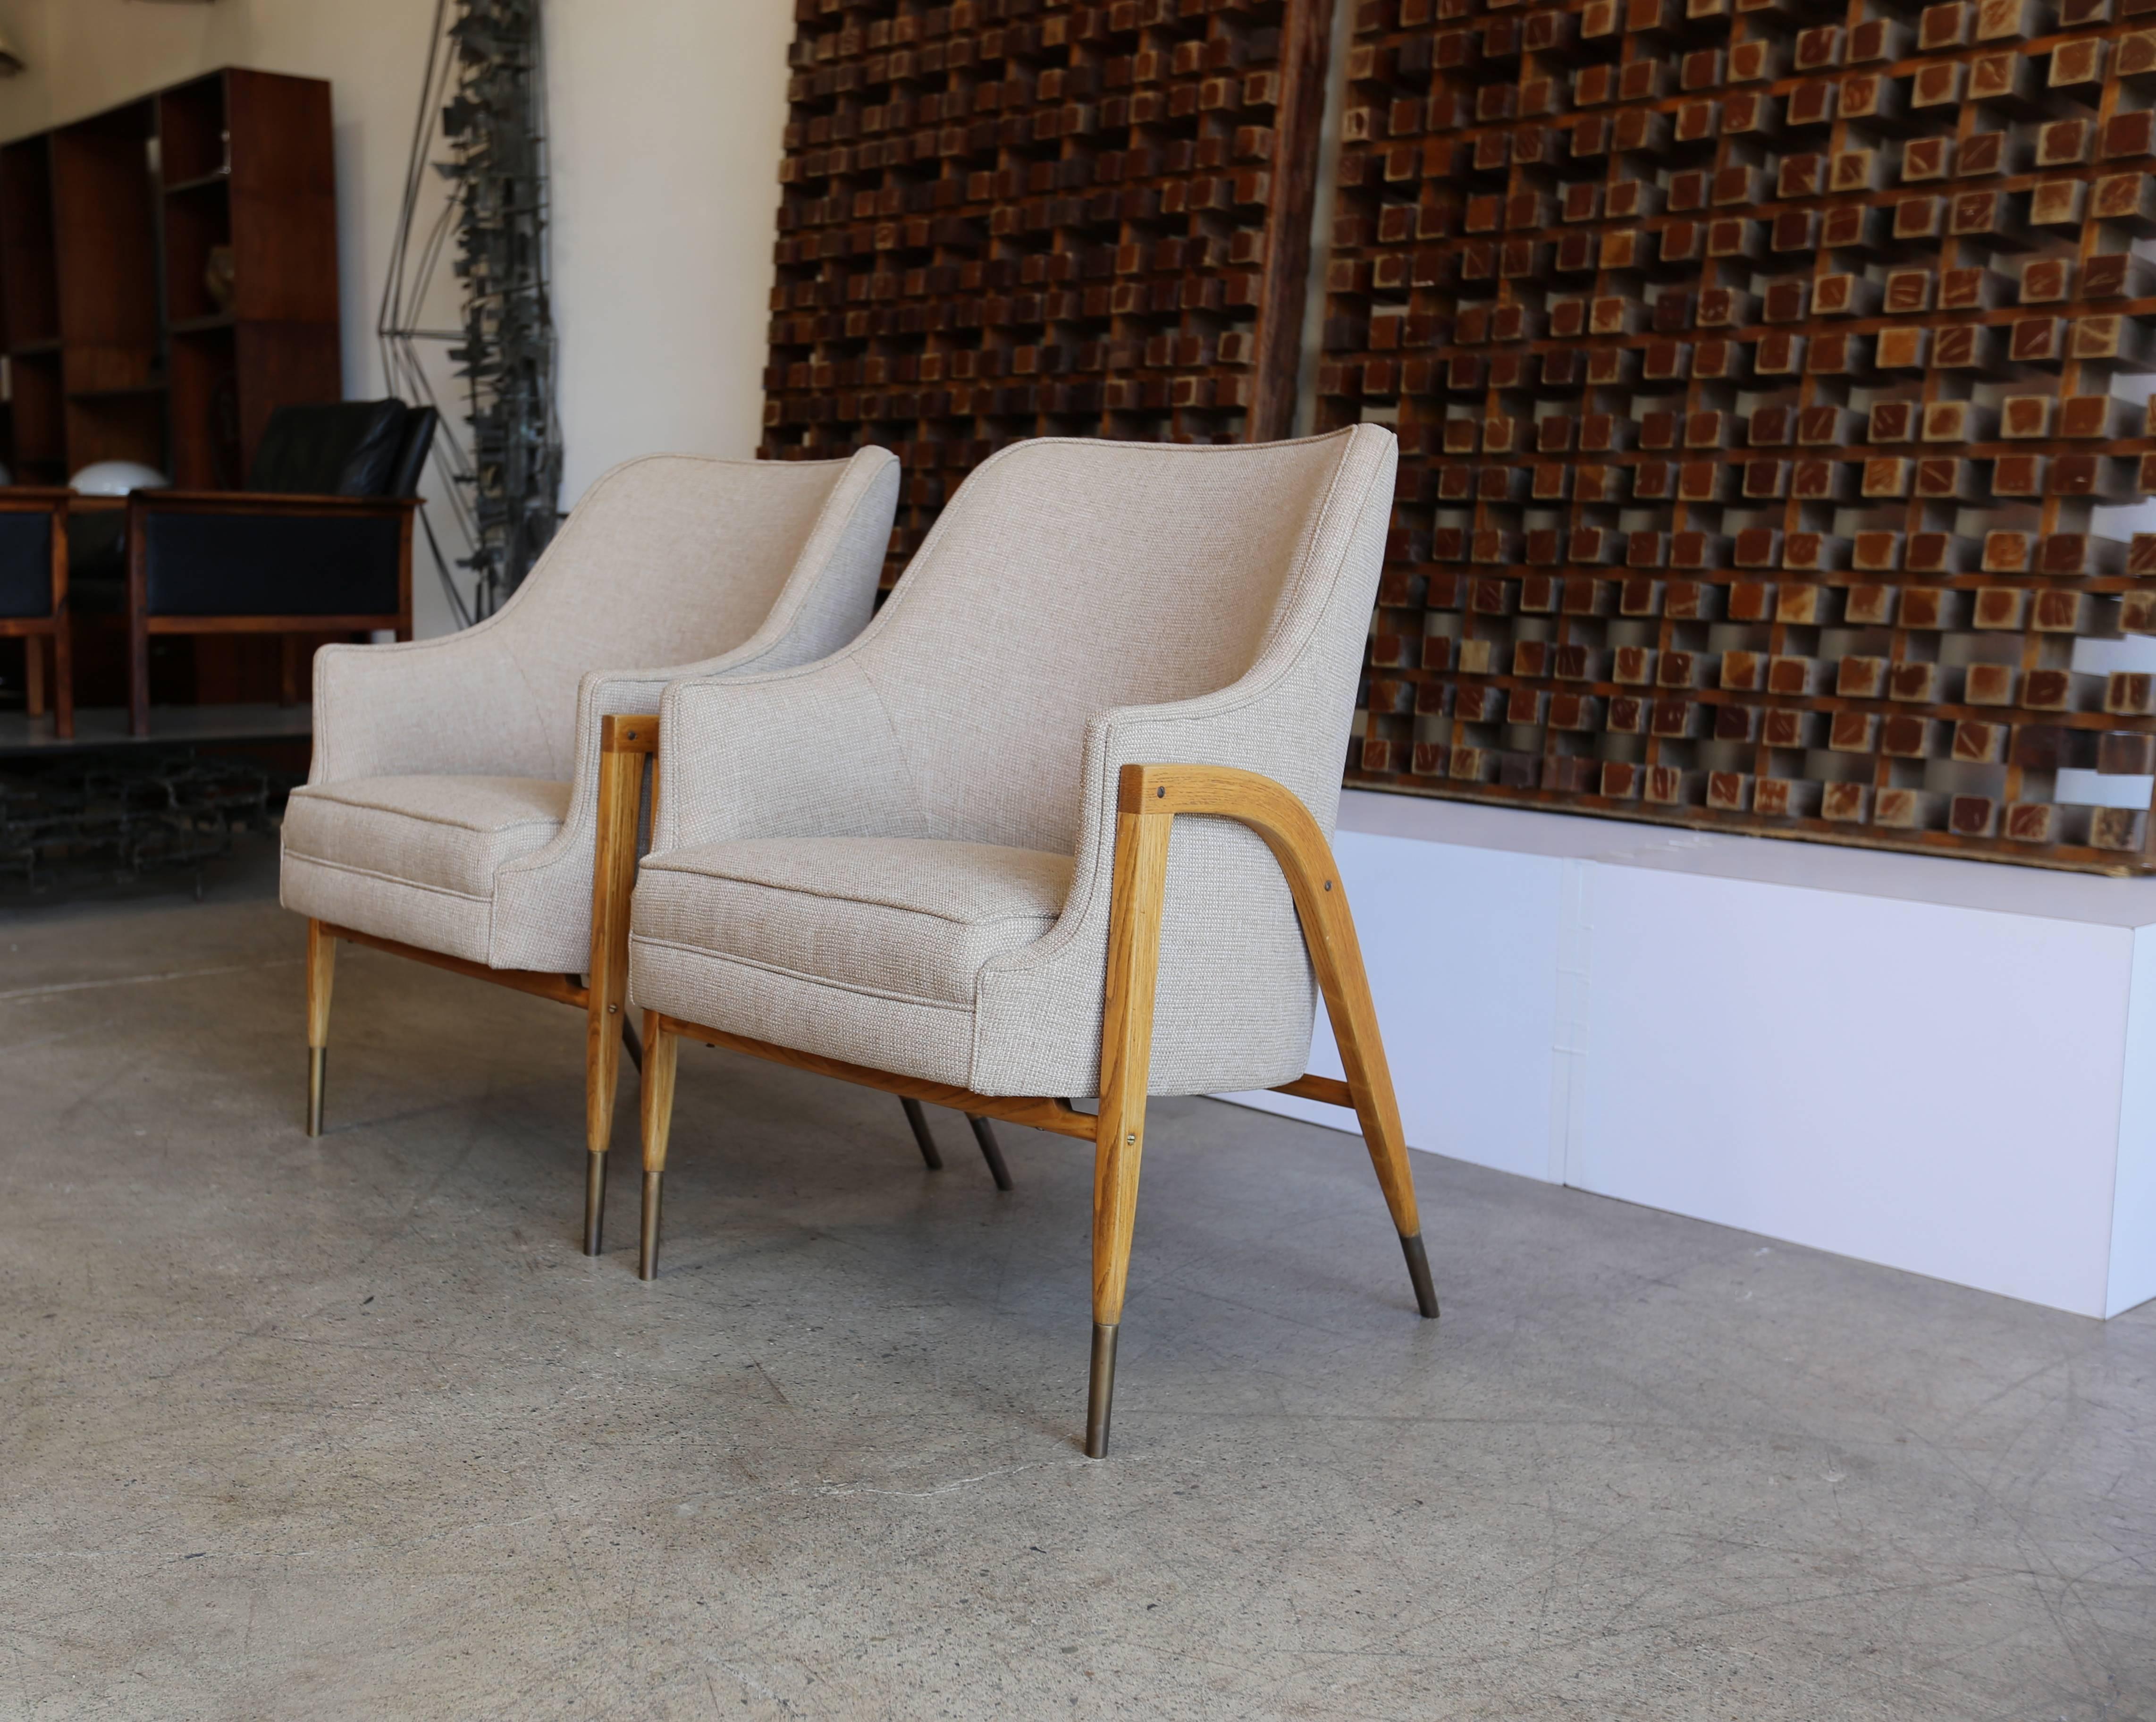 20th Century Rare Pair of Model # 5510 Armchairs by Edward Wormley for Dunbar